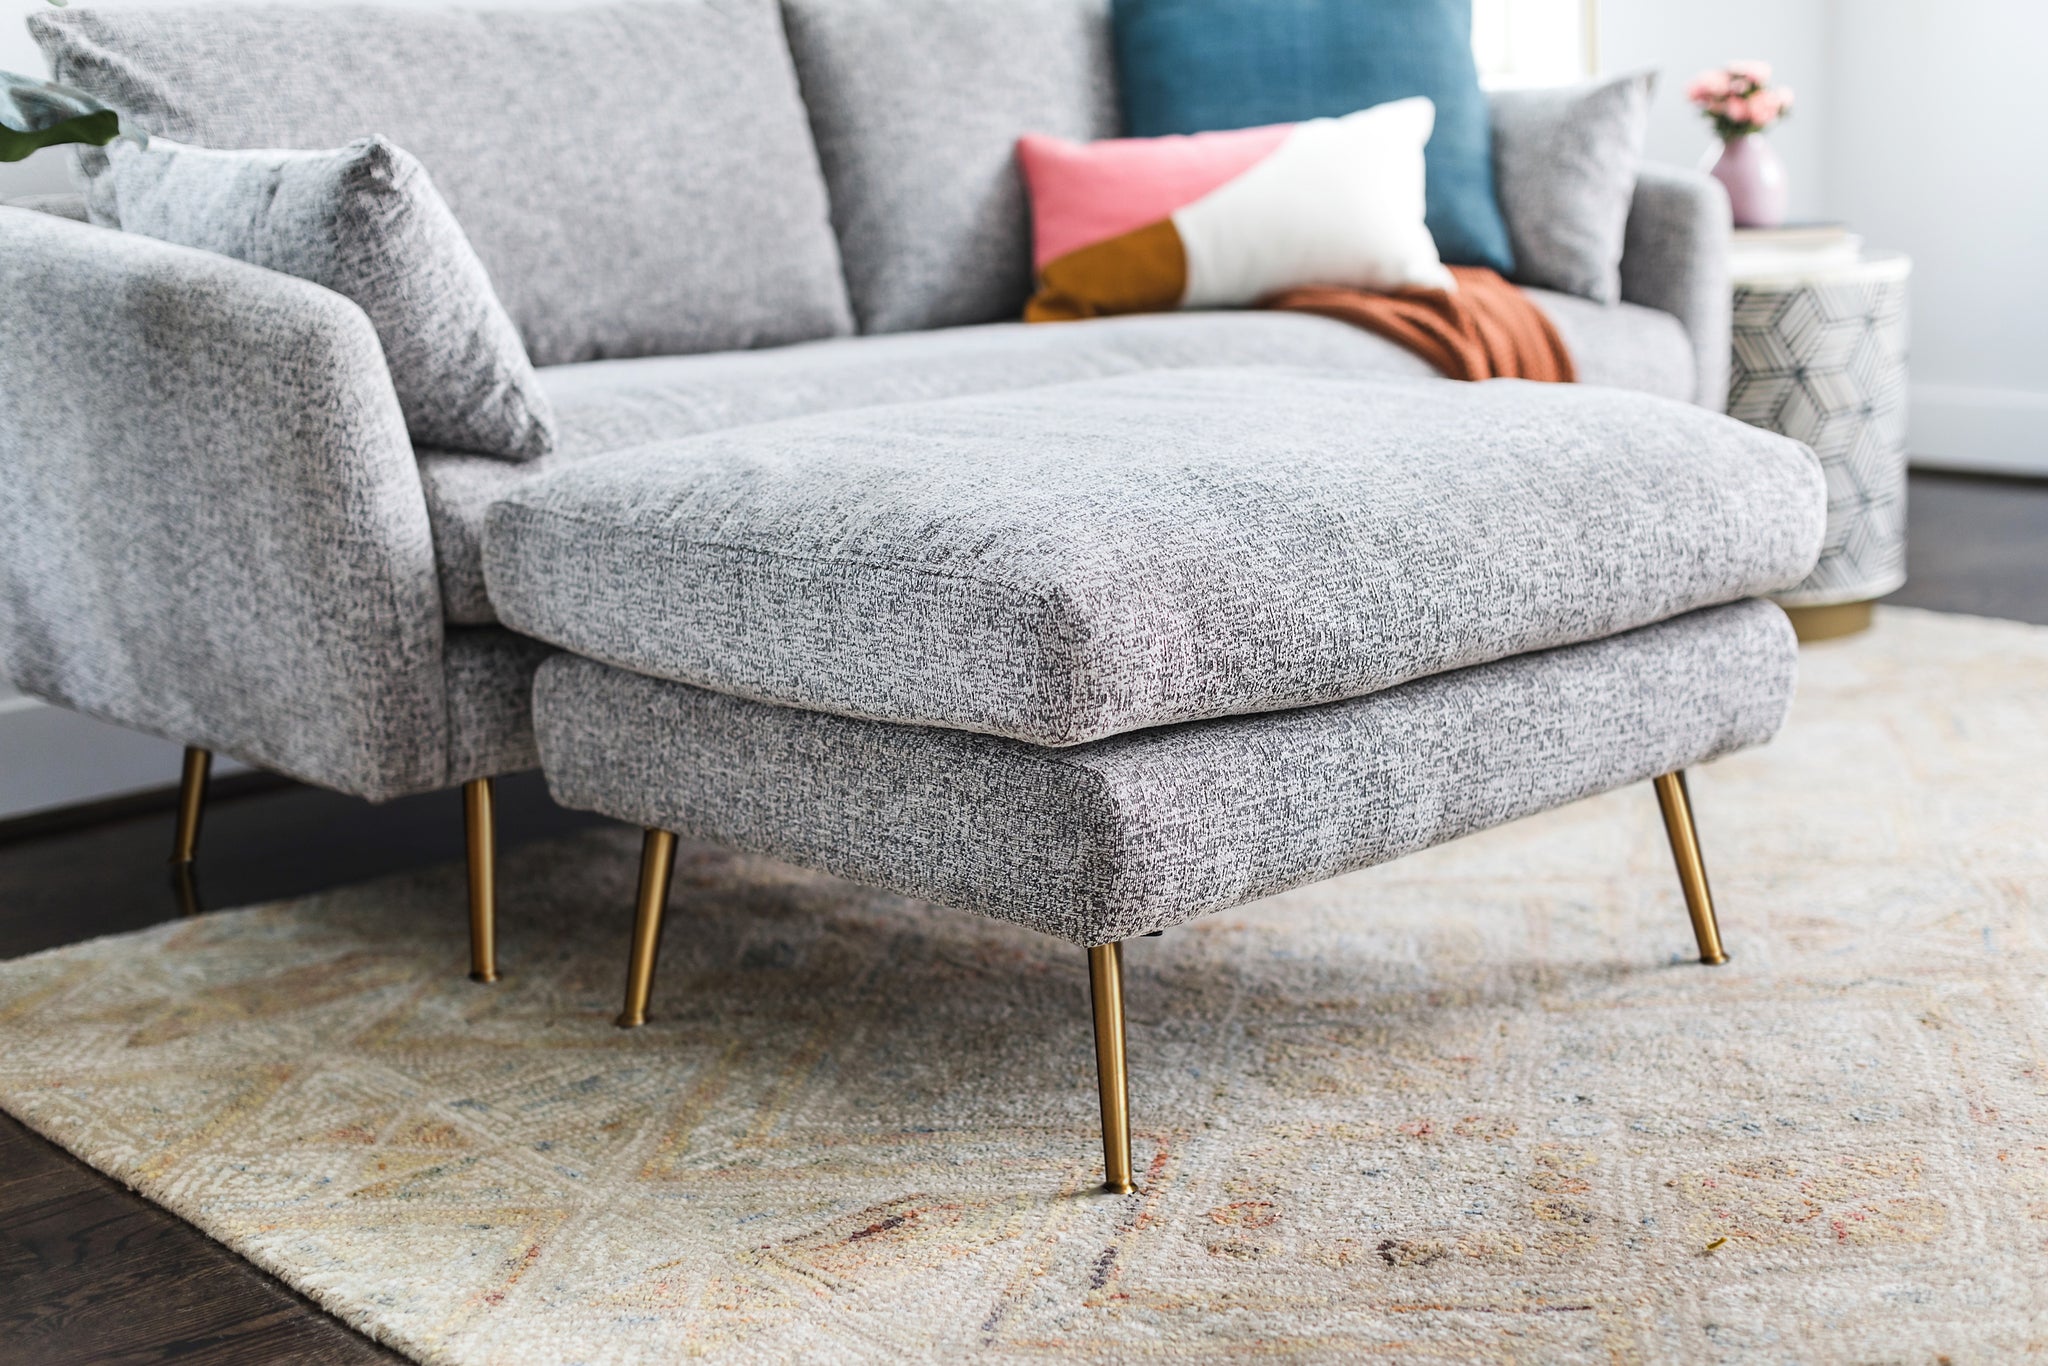 park ottoman shown in grey fabric with gold legs